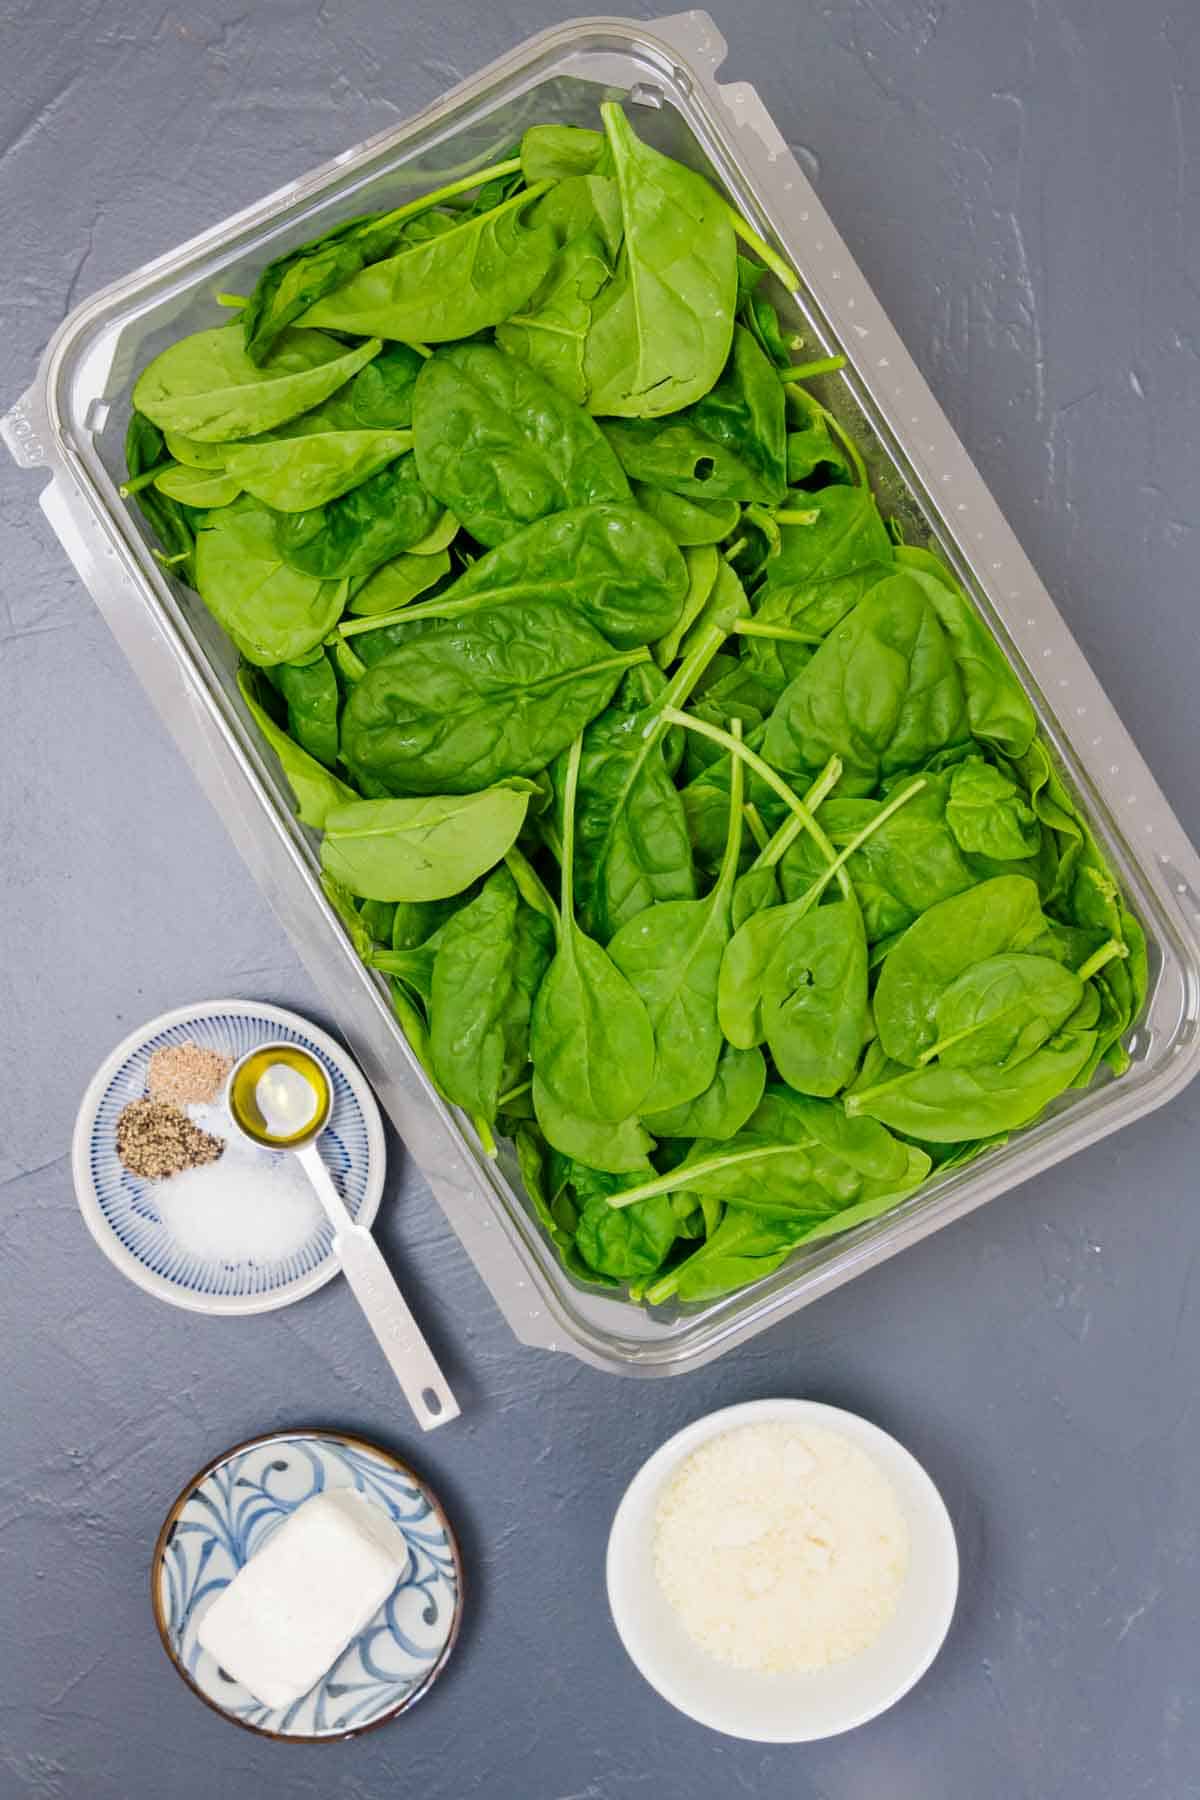 The ingredients needed to make creamed spinach are shown portioned out on a gray background: baby spinach leaves, cream cheese, parmesan cheese, salt and pepper, olive oil, and nutmeg.